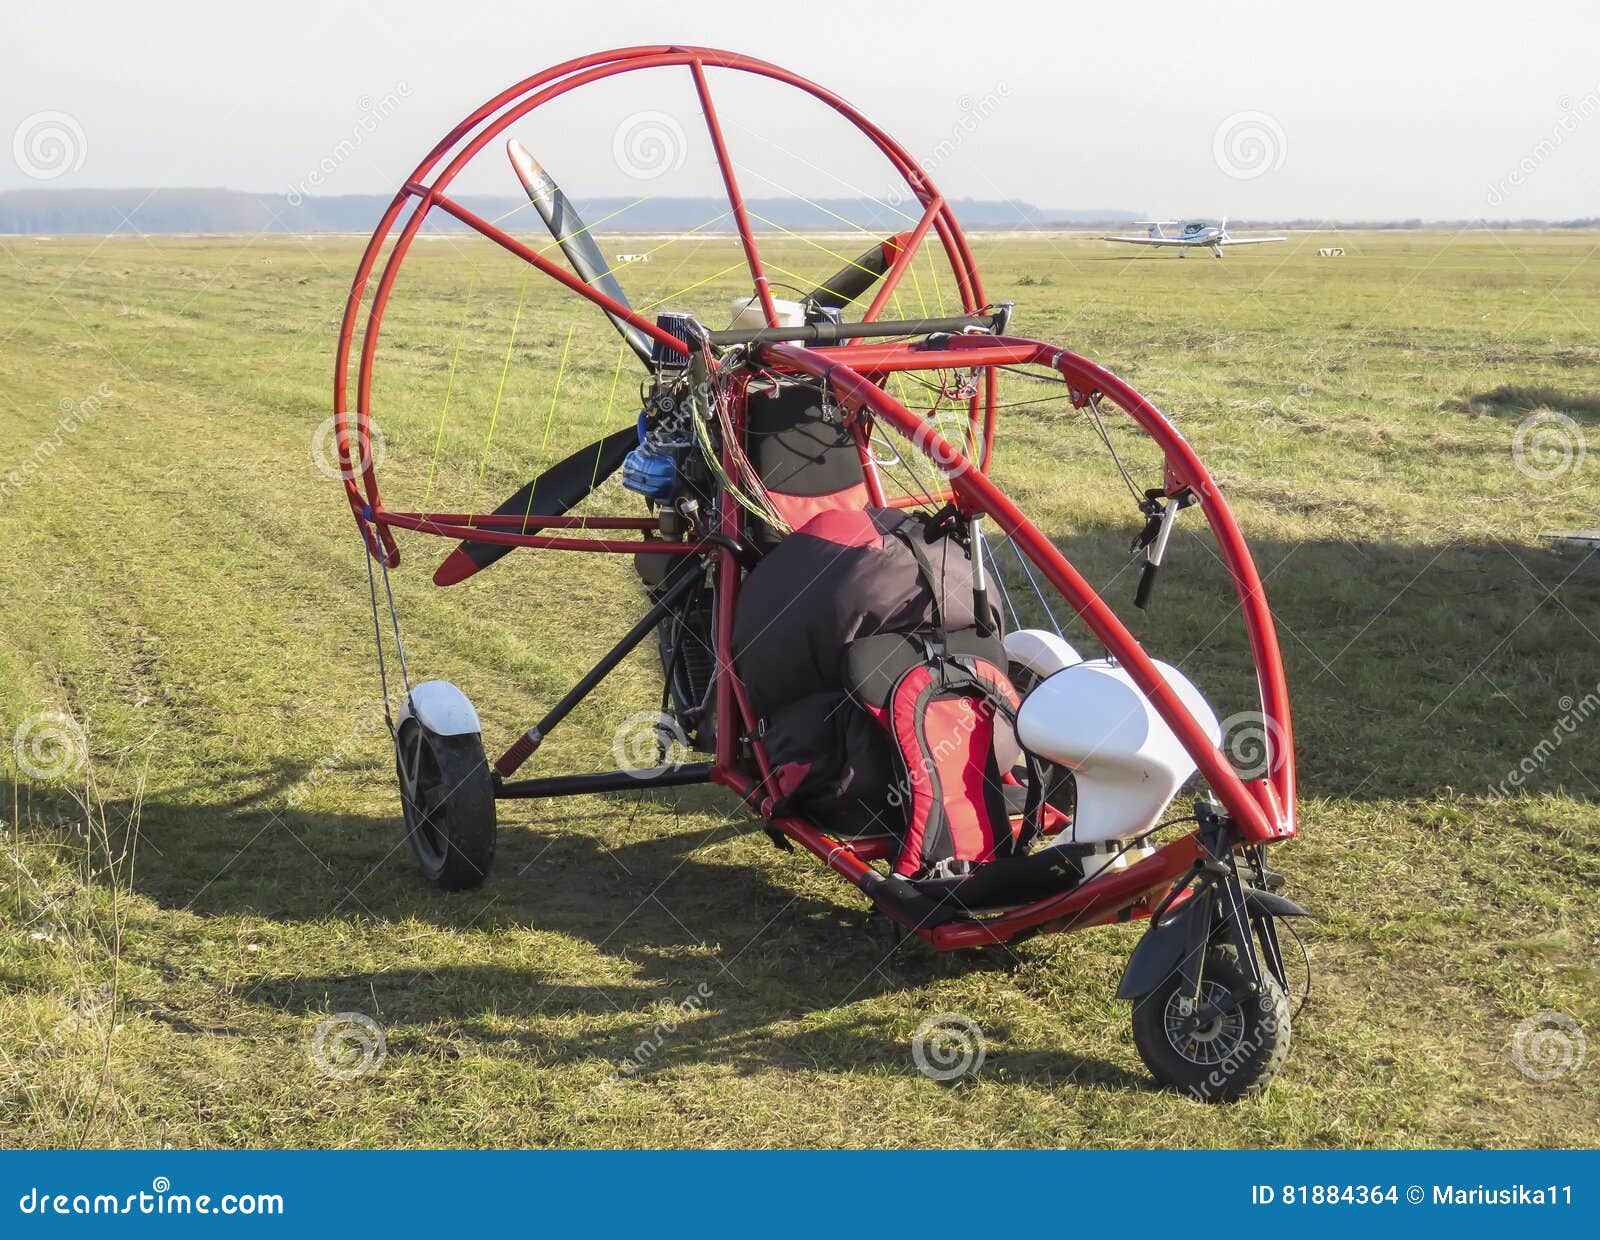 motorized paraglider on airfield